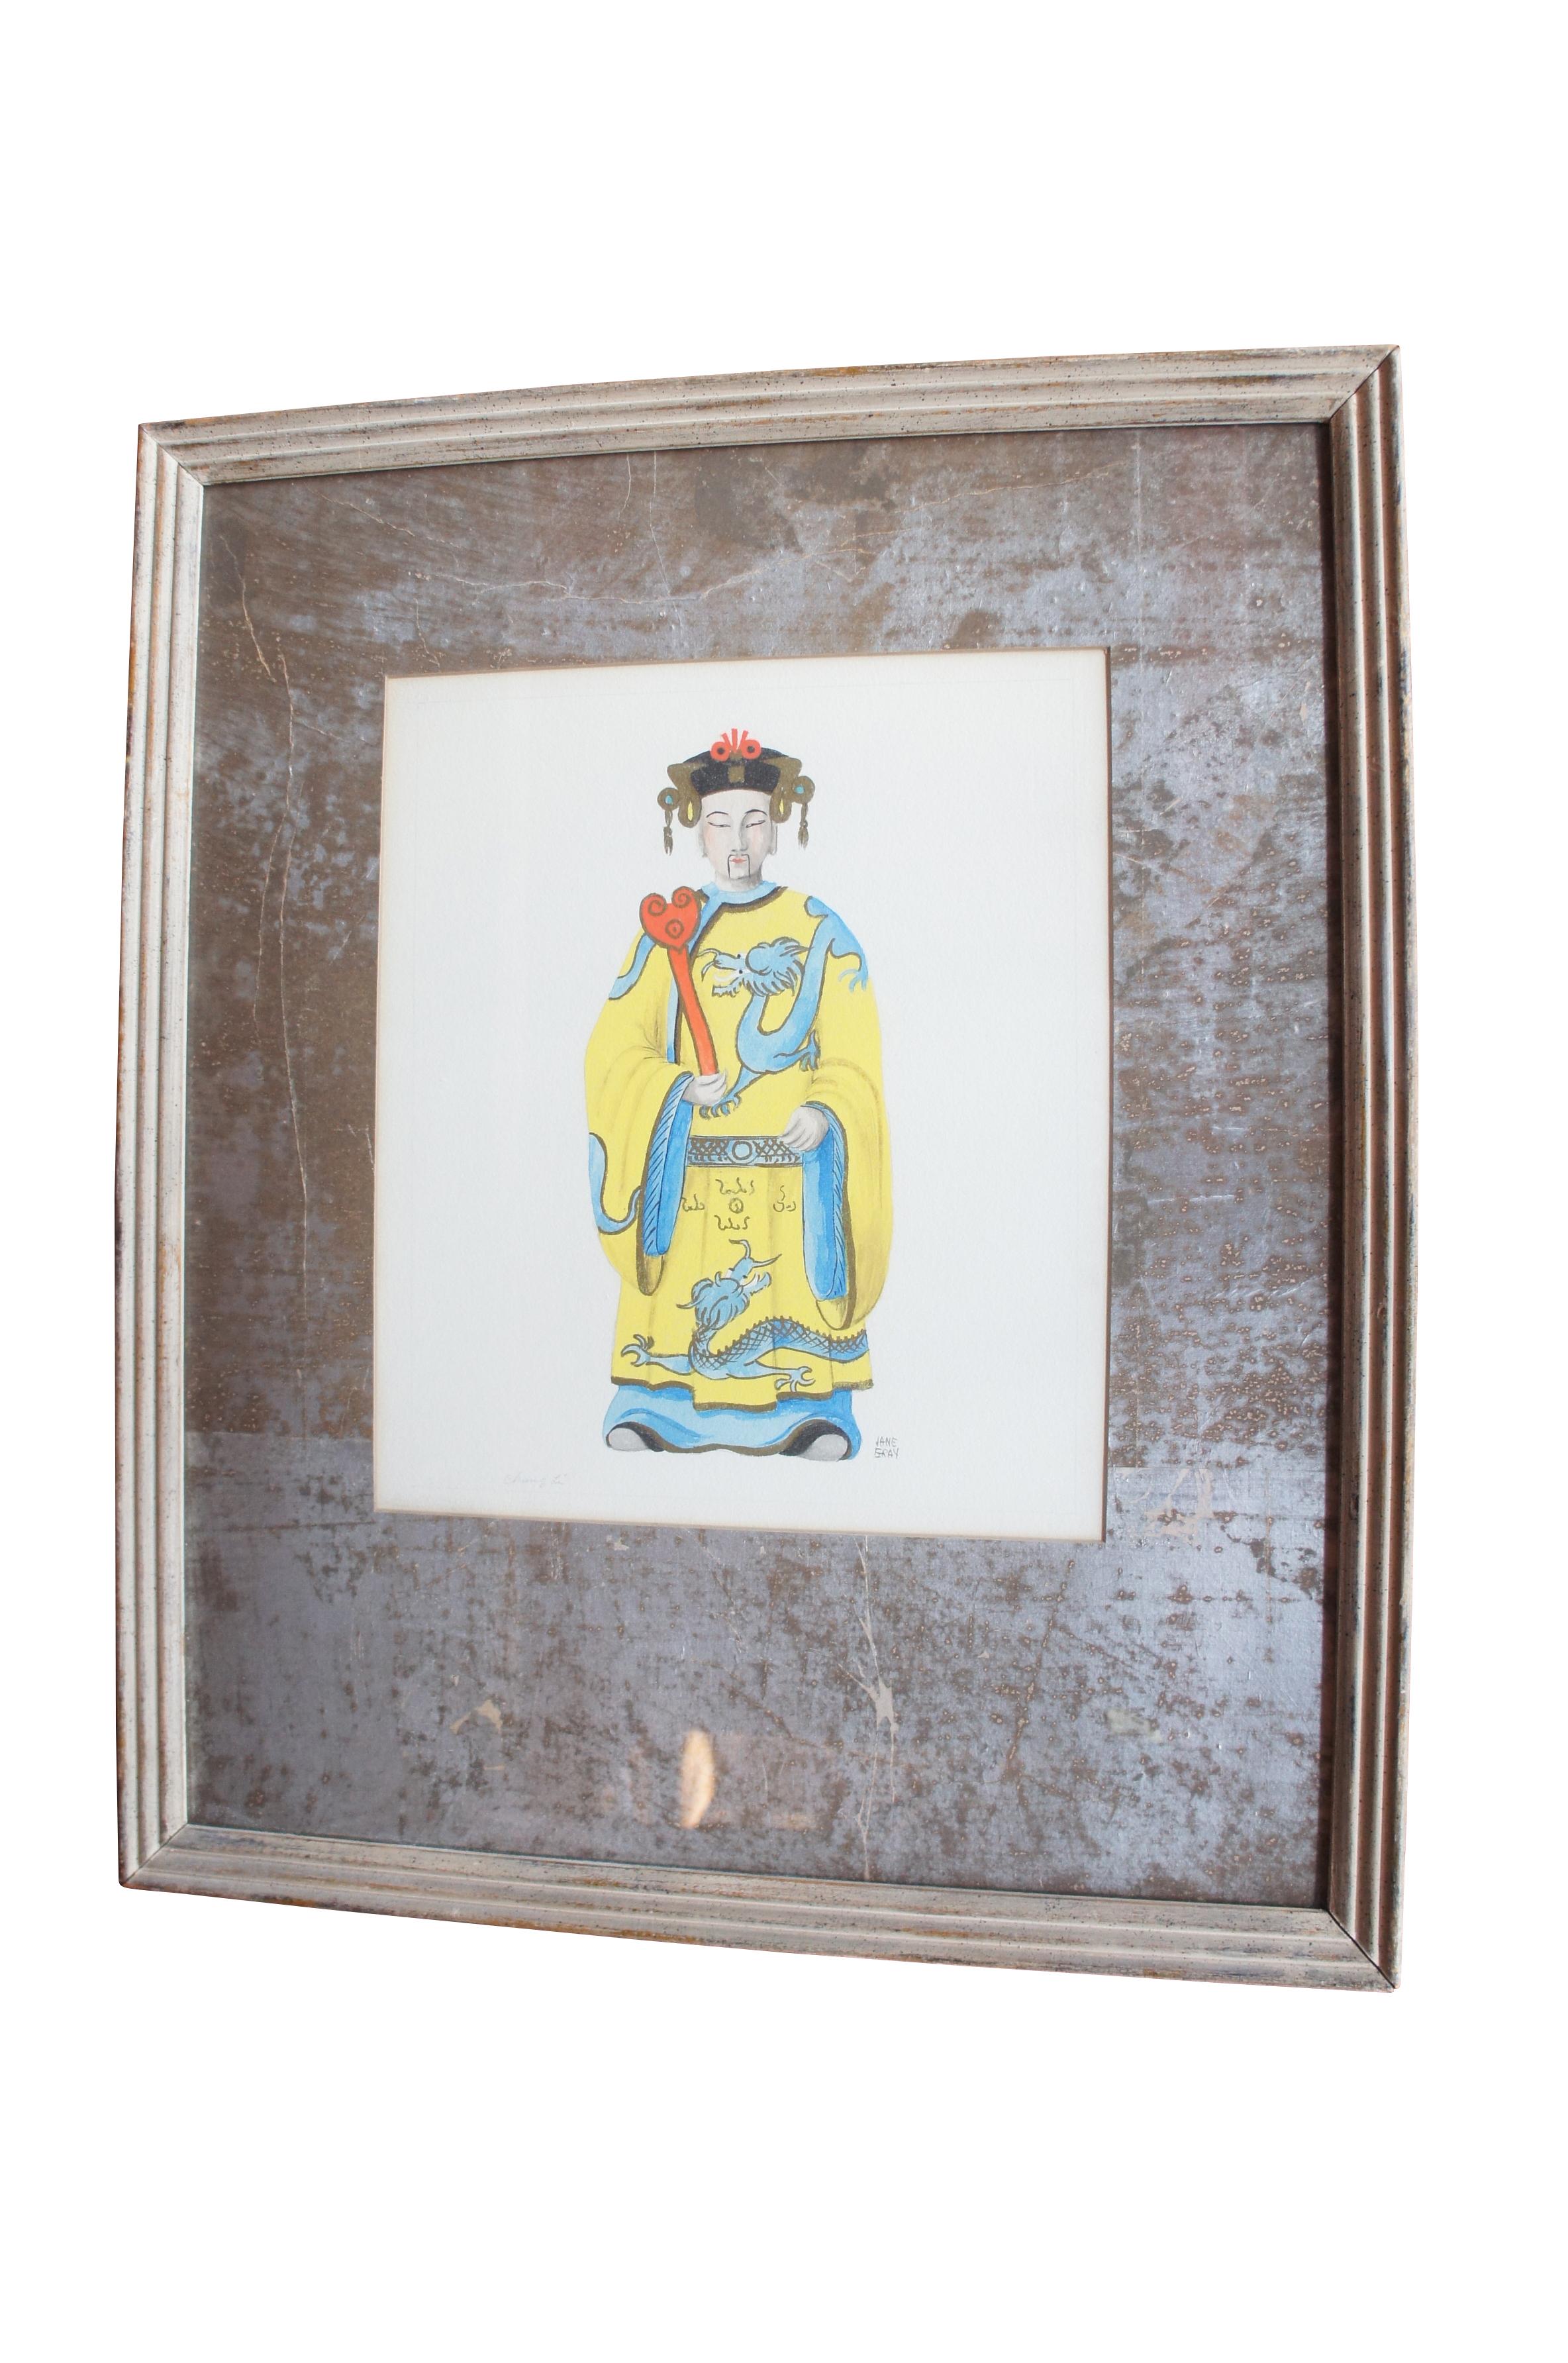 Pair of two vintage Jane Gray watercolor portrait paintings of Kuan Yin and Chung Li. 

Provenance:
Estate of J. Frederic Gagel, owner of multiple Thoroughbred race horses that competed in the Narragansett Special and Kentucky Derby. Their family